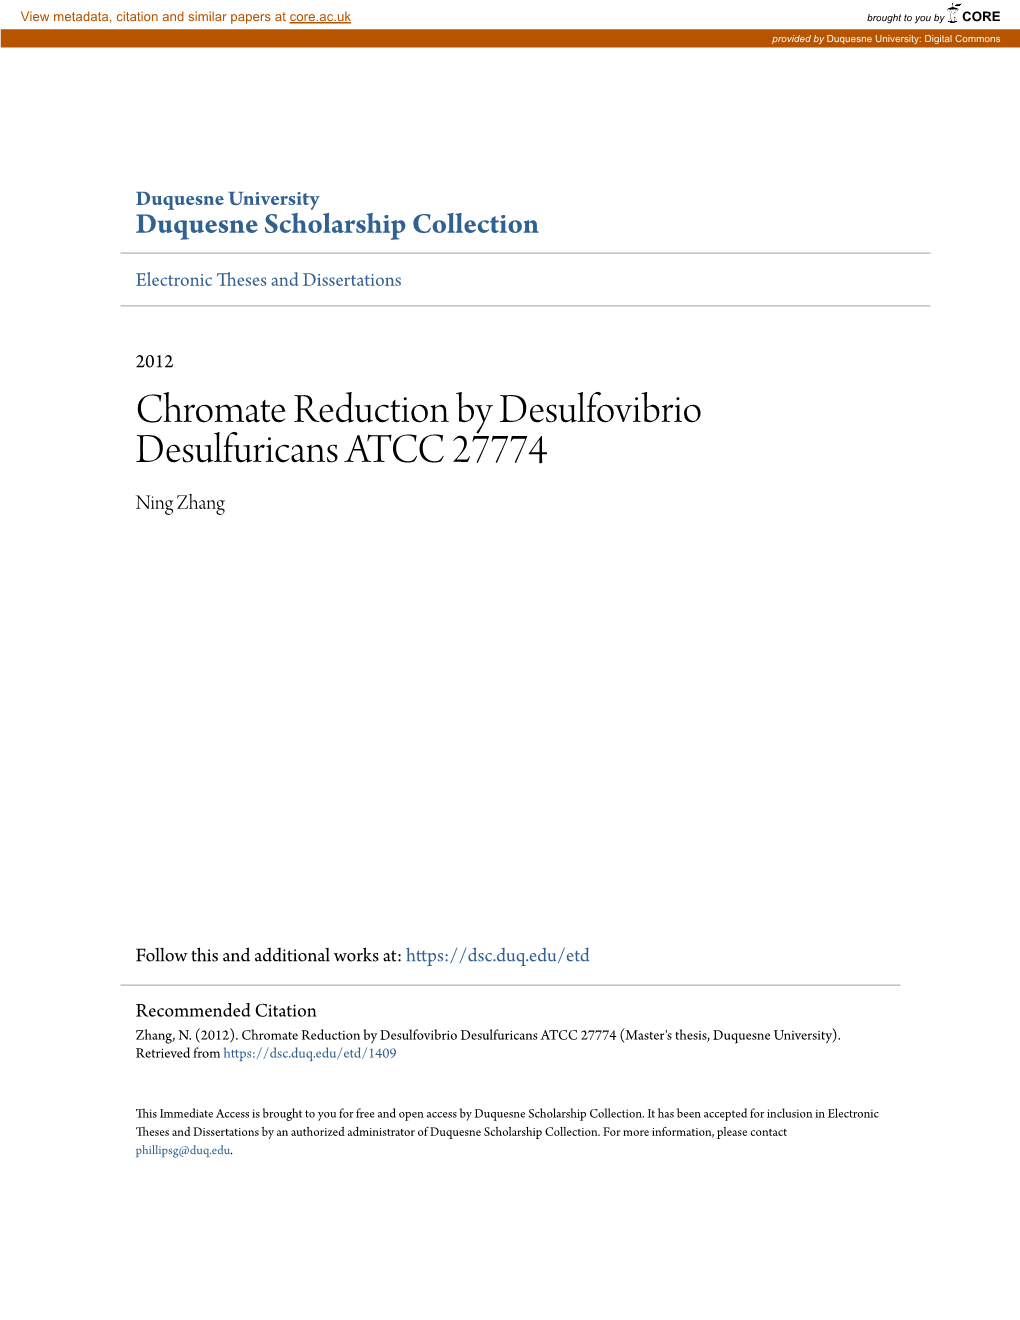 Chromate Reduction by Desulfovibrio Desulfuricans ATCC 27774 Ning Zhang